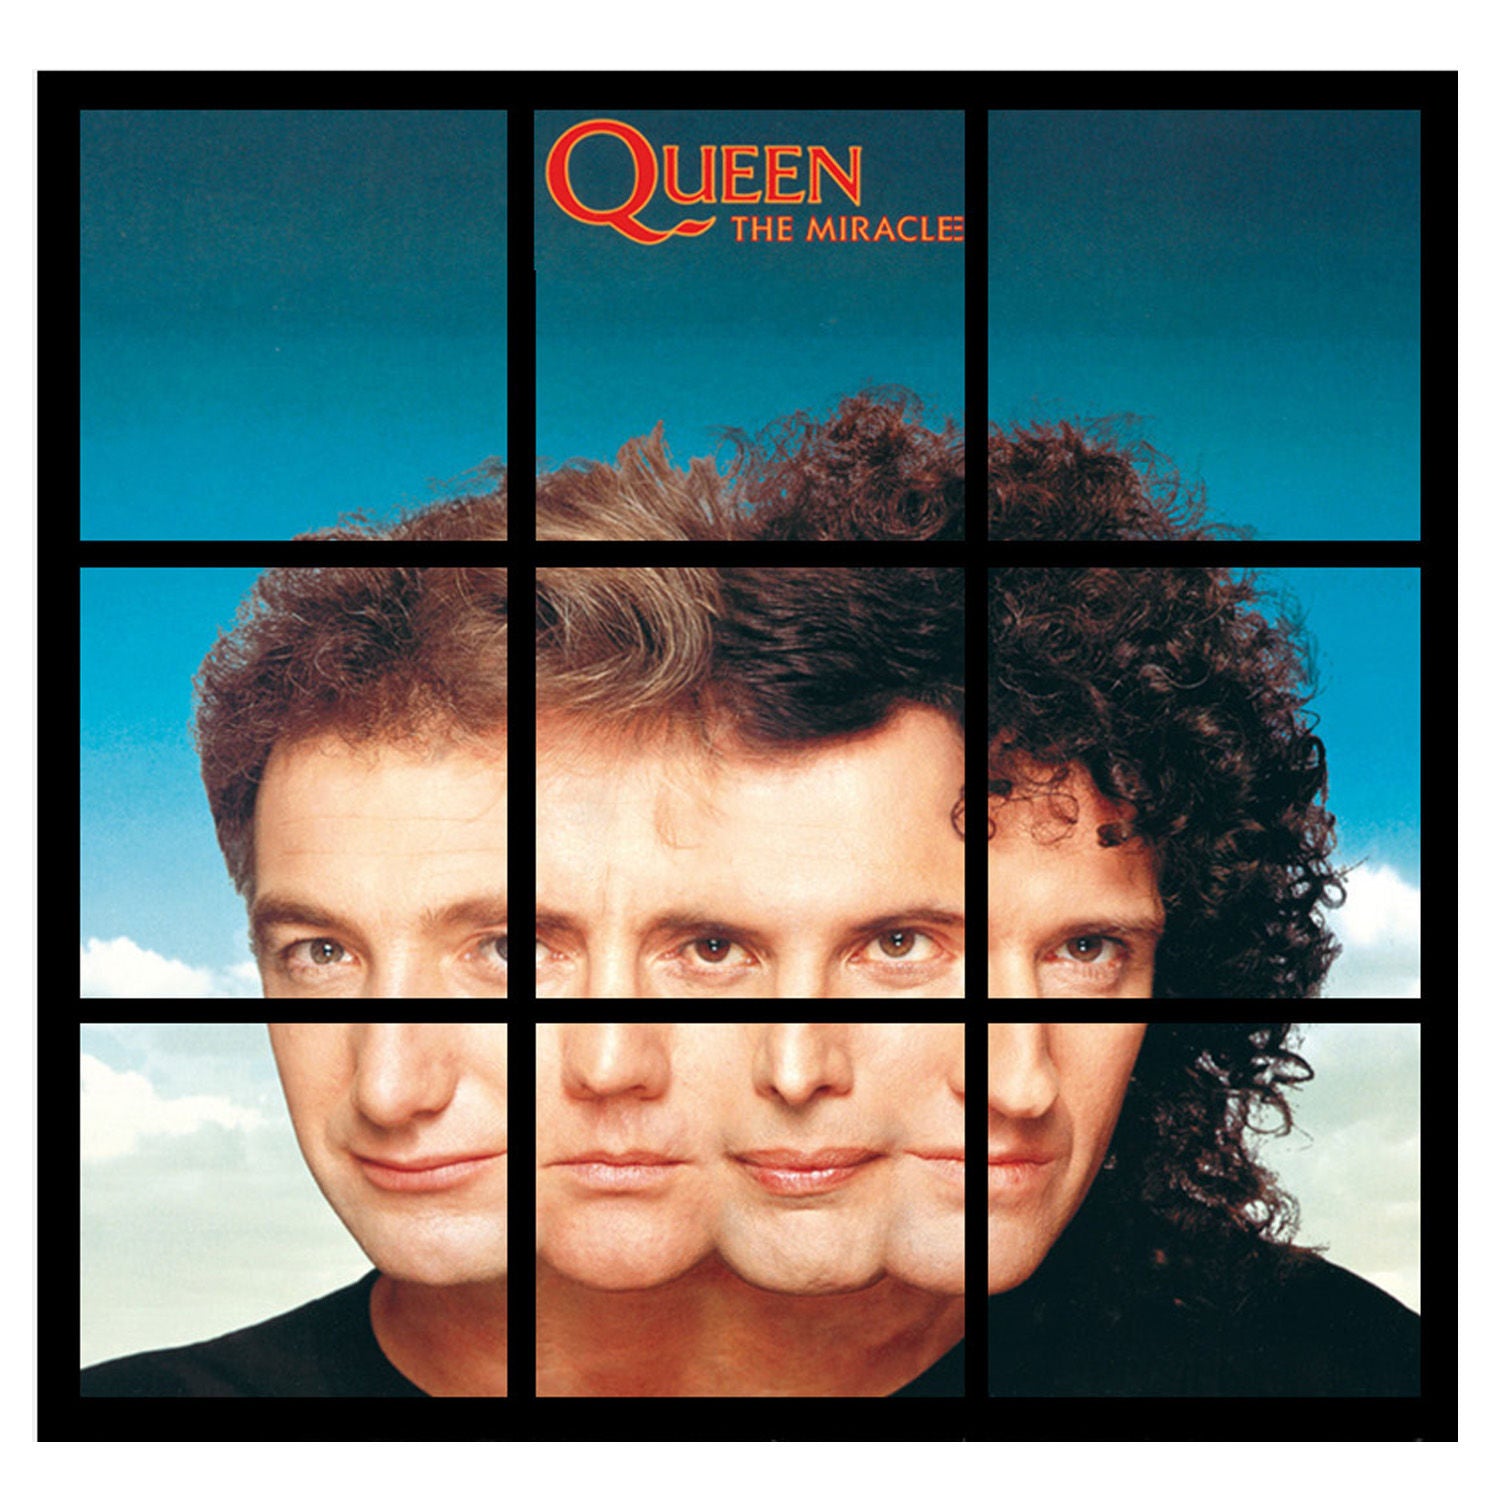 Queen - 'The Miracle' Cube